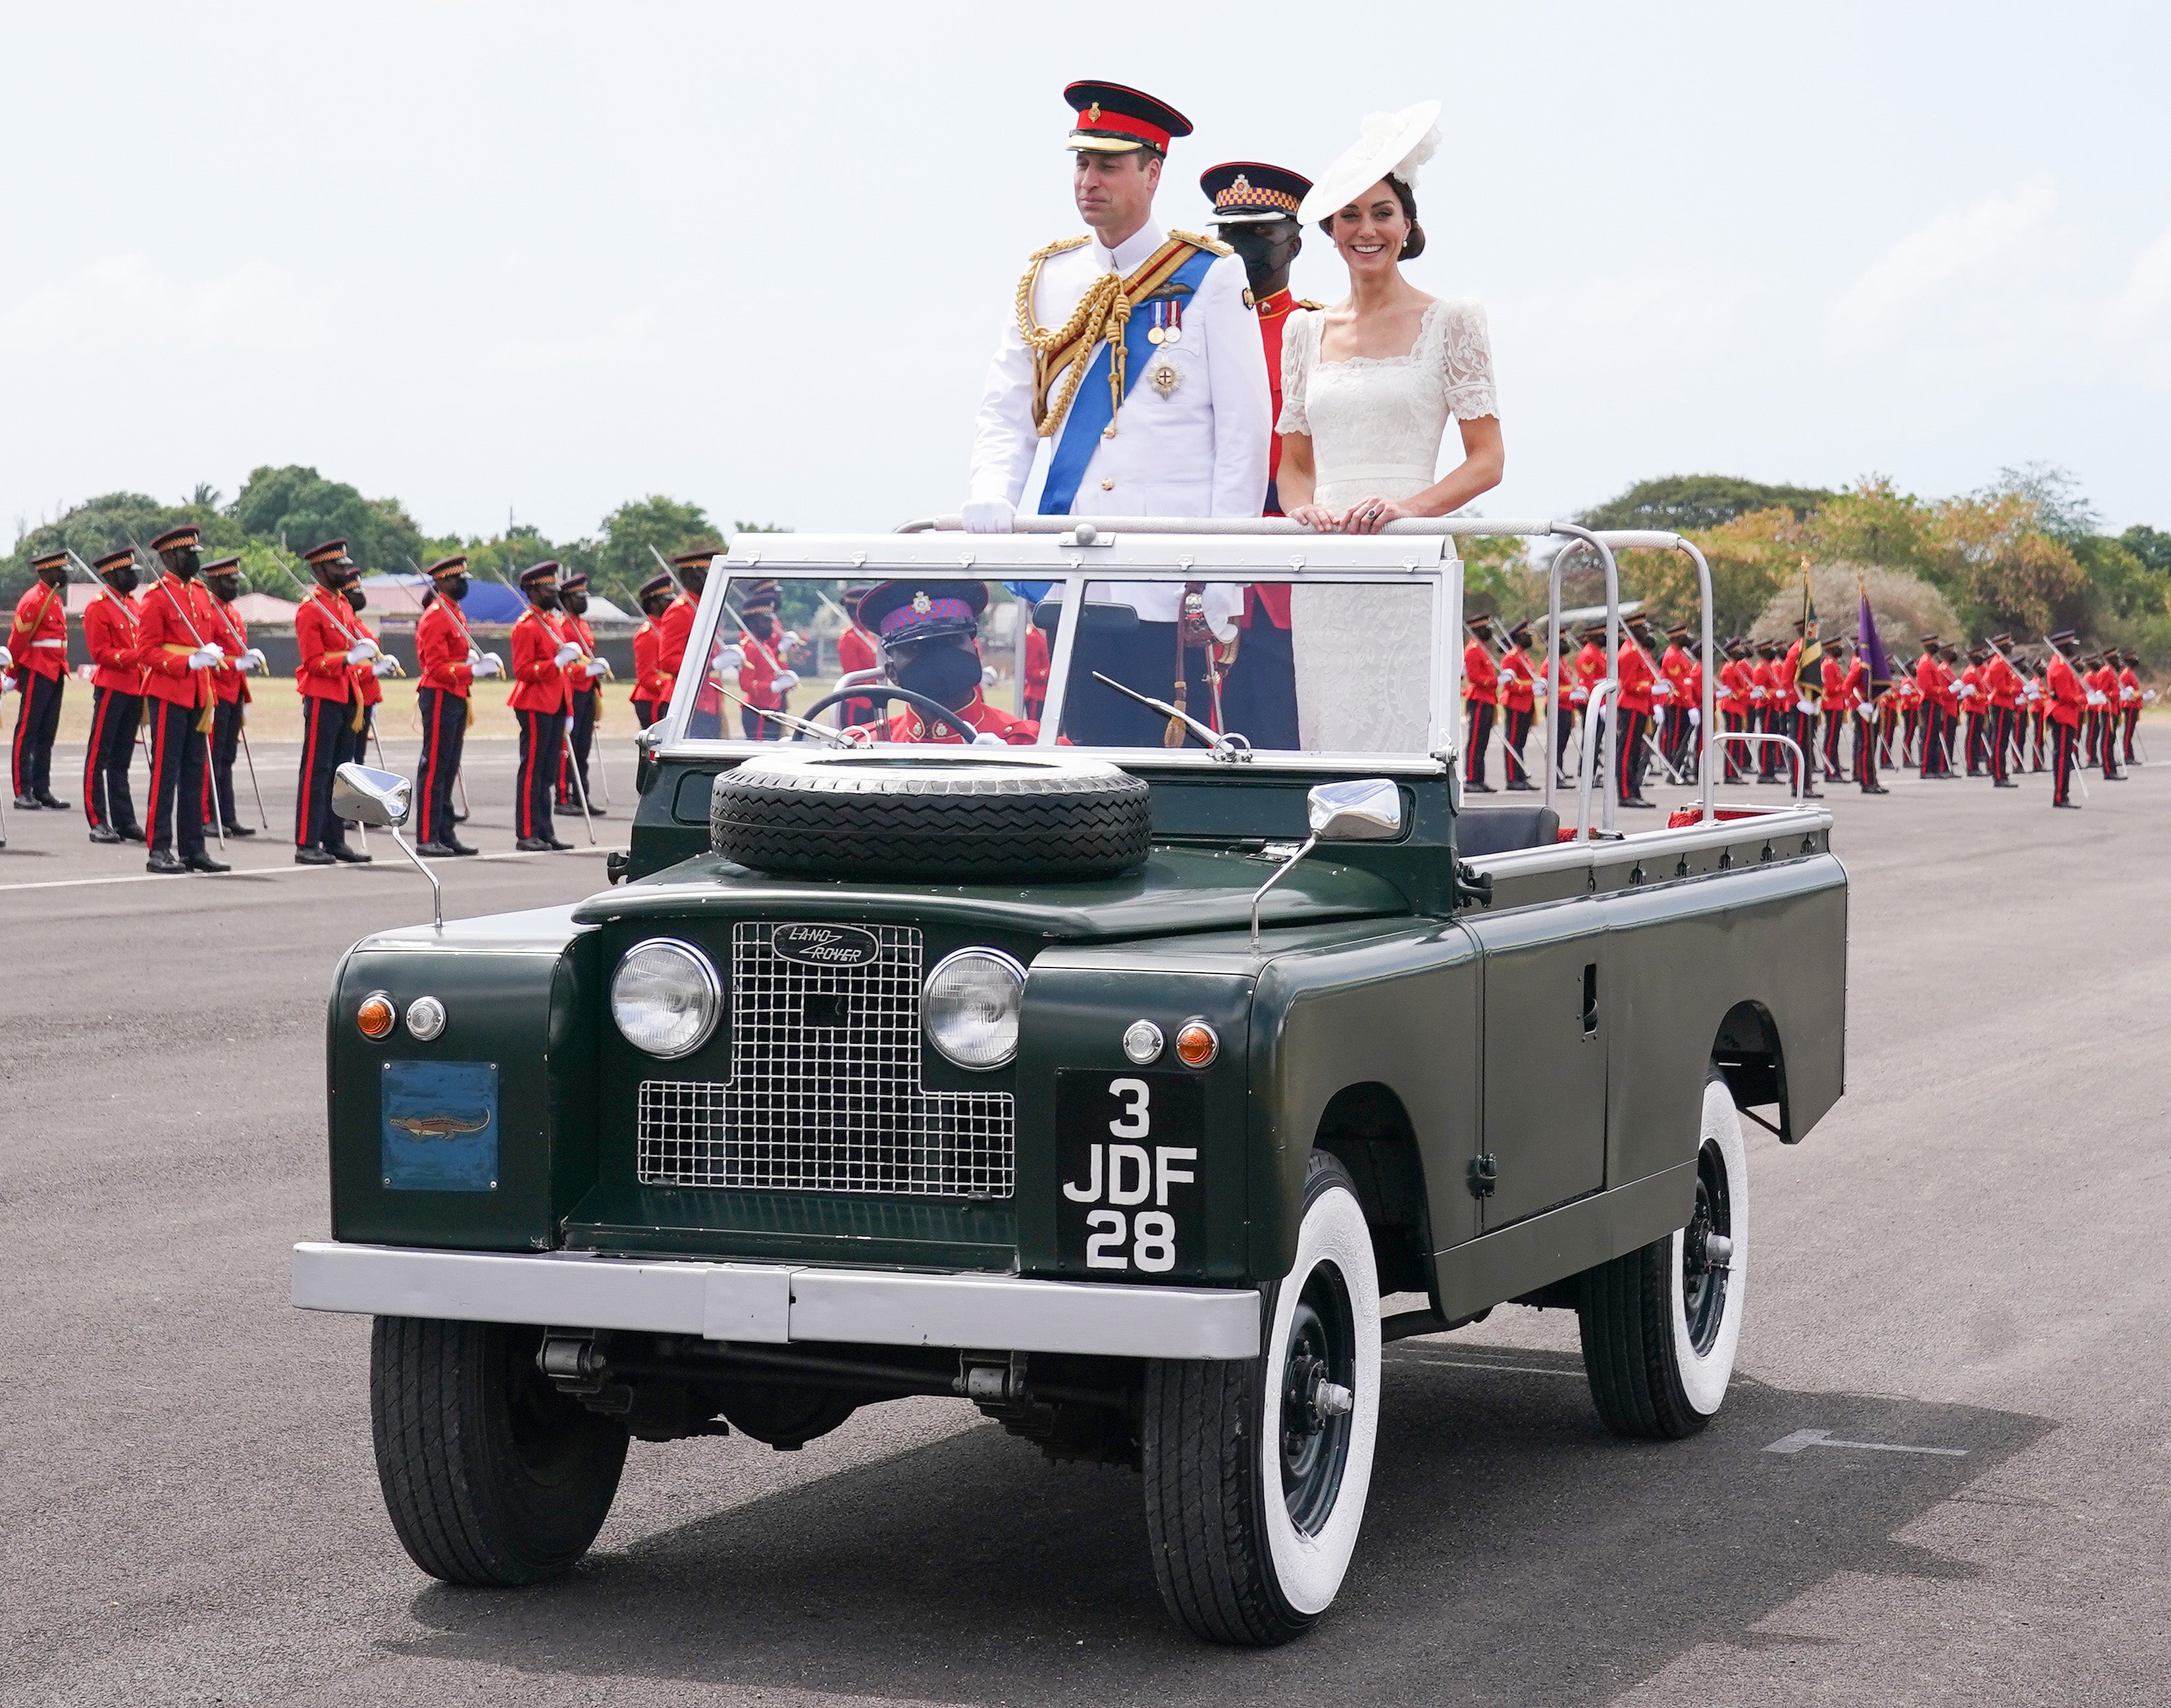 The Cambridges’ trip was seen by some as a relic of the colonial era